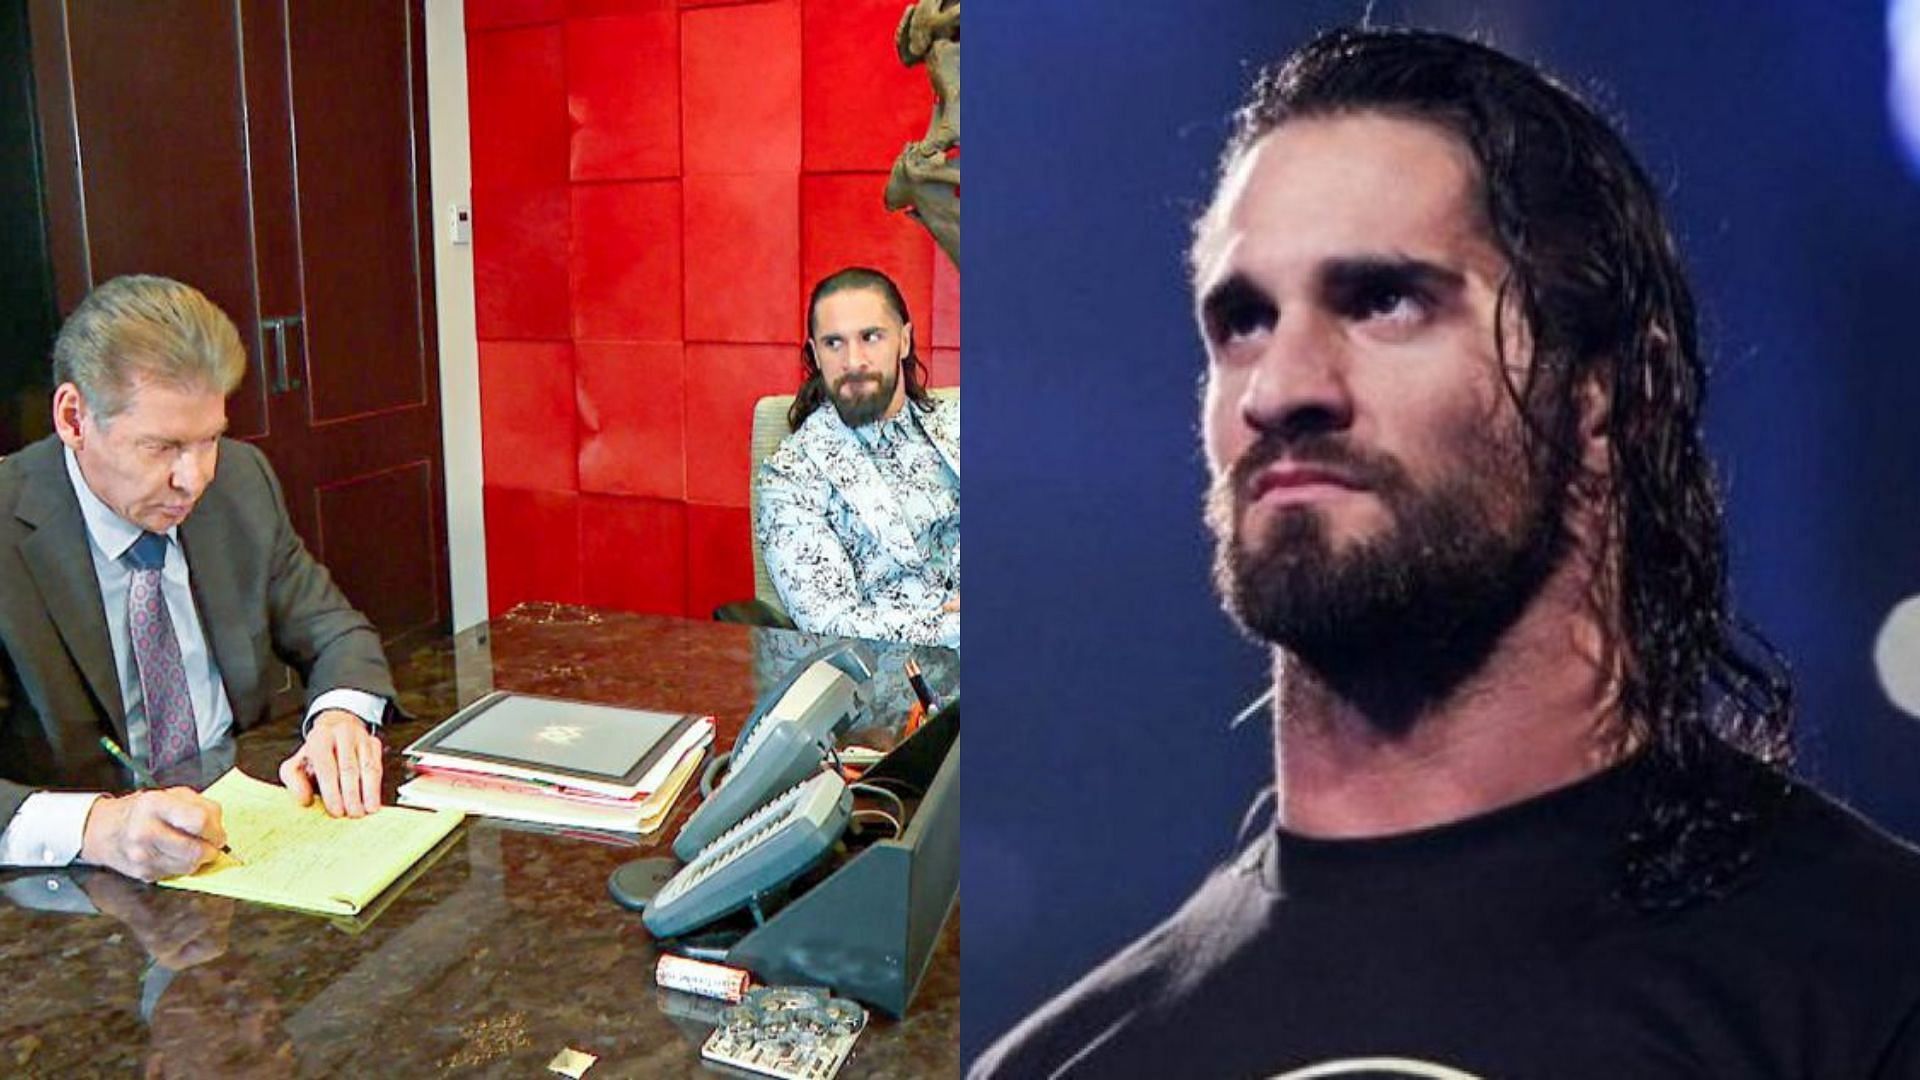 Seth Rollins is a four-time world champion